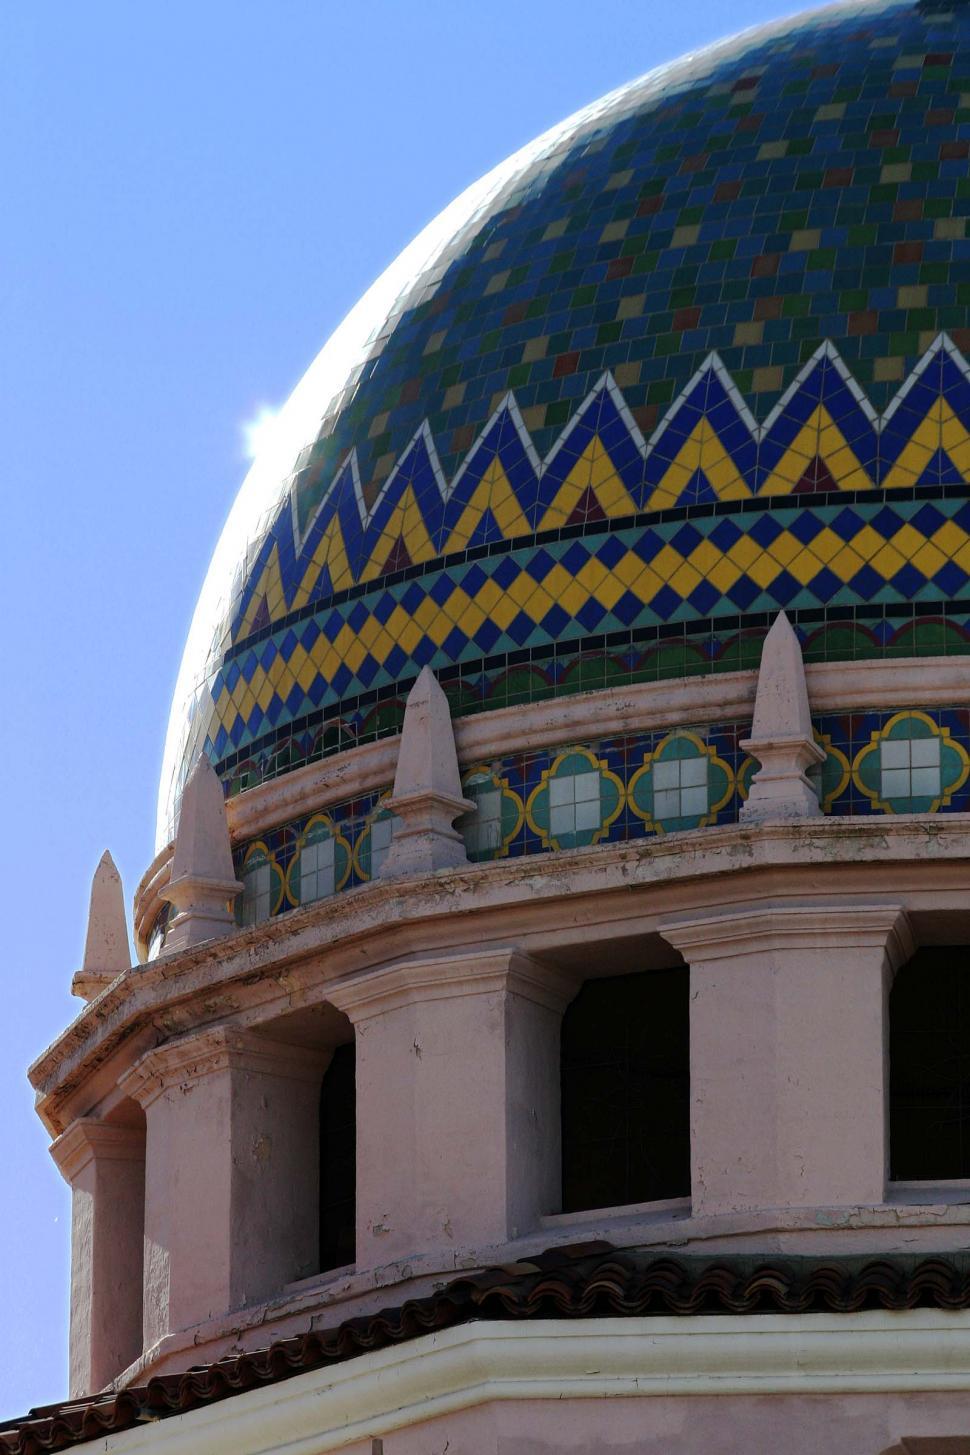 Free Image of Tucson courthouse dome 